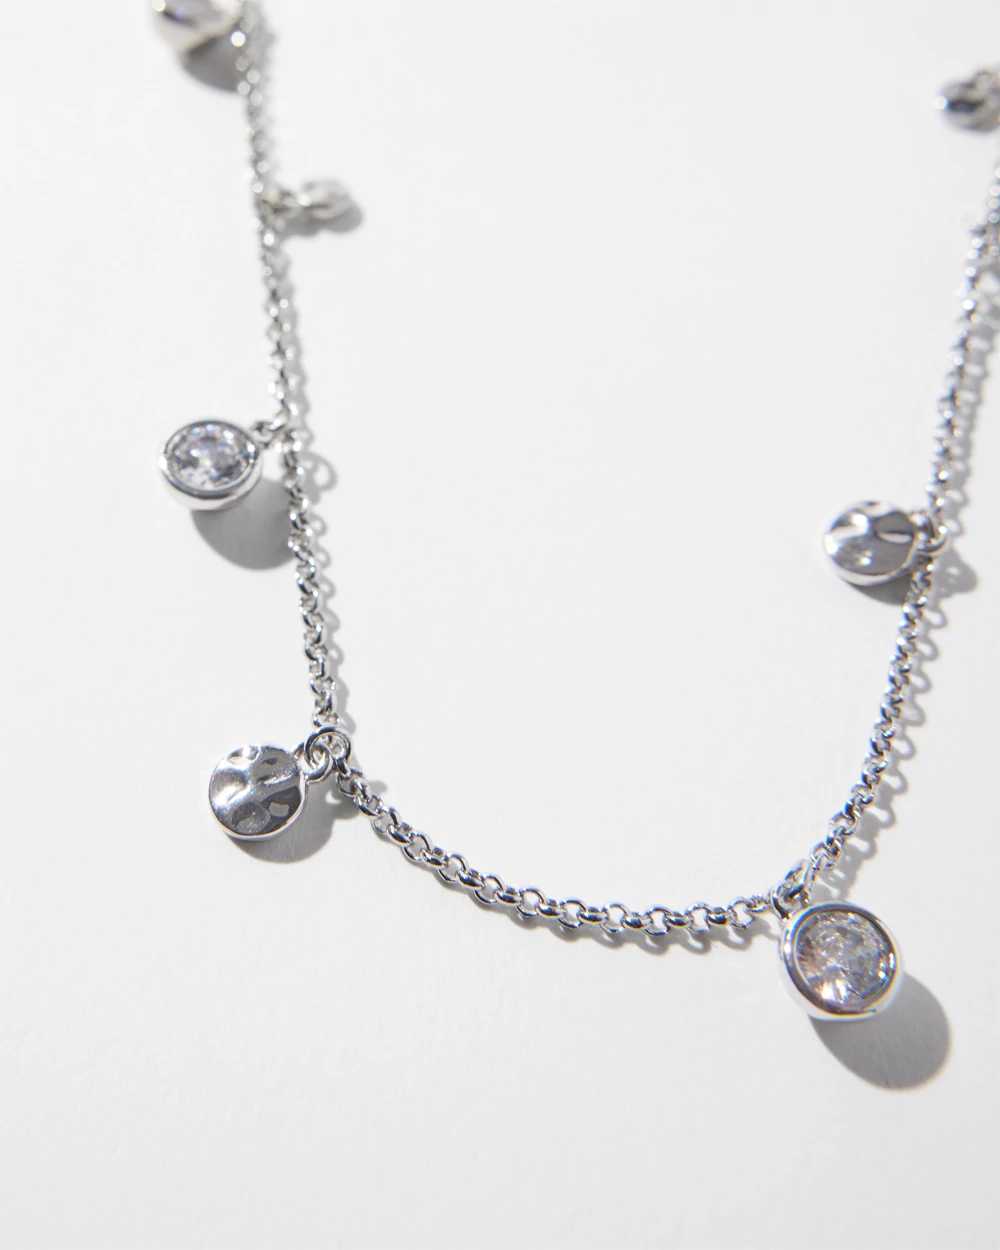 Silver Crystal Long Disc Necklace click to view larger image.